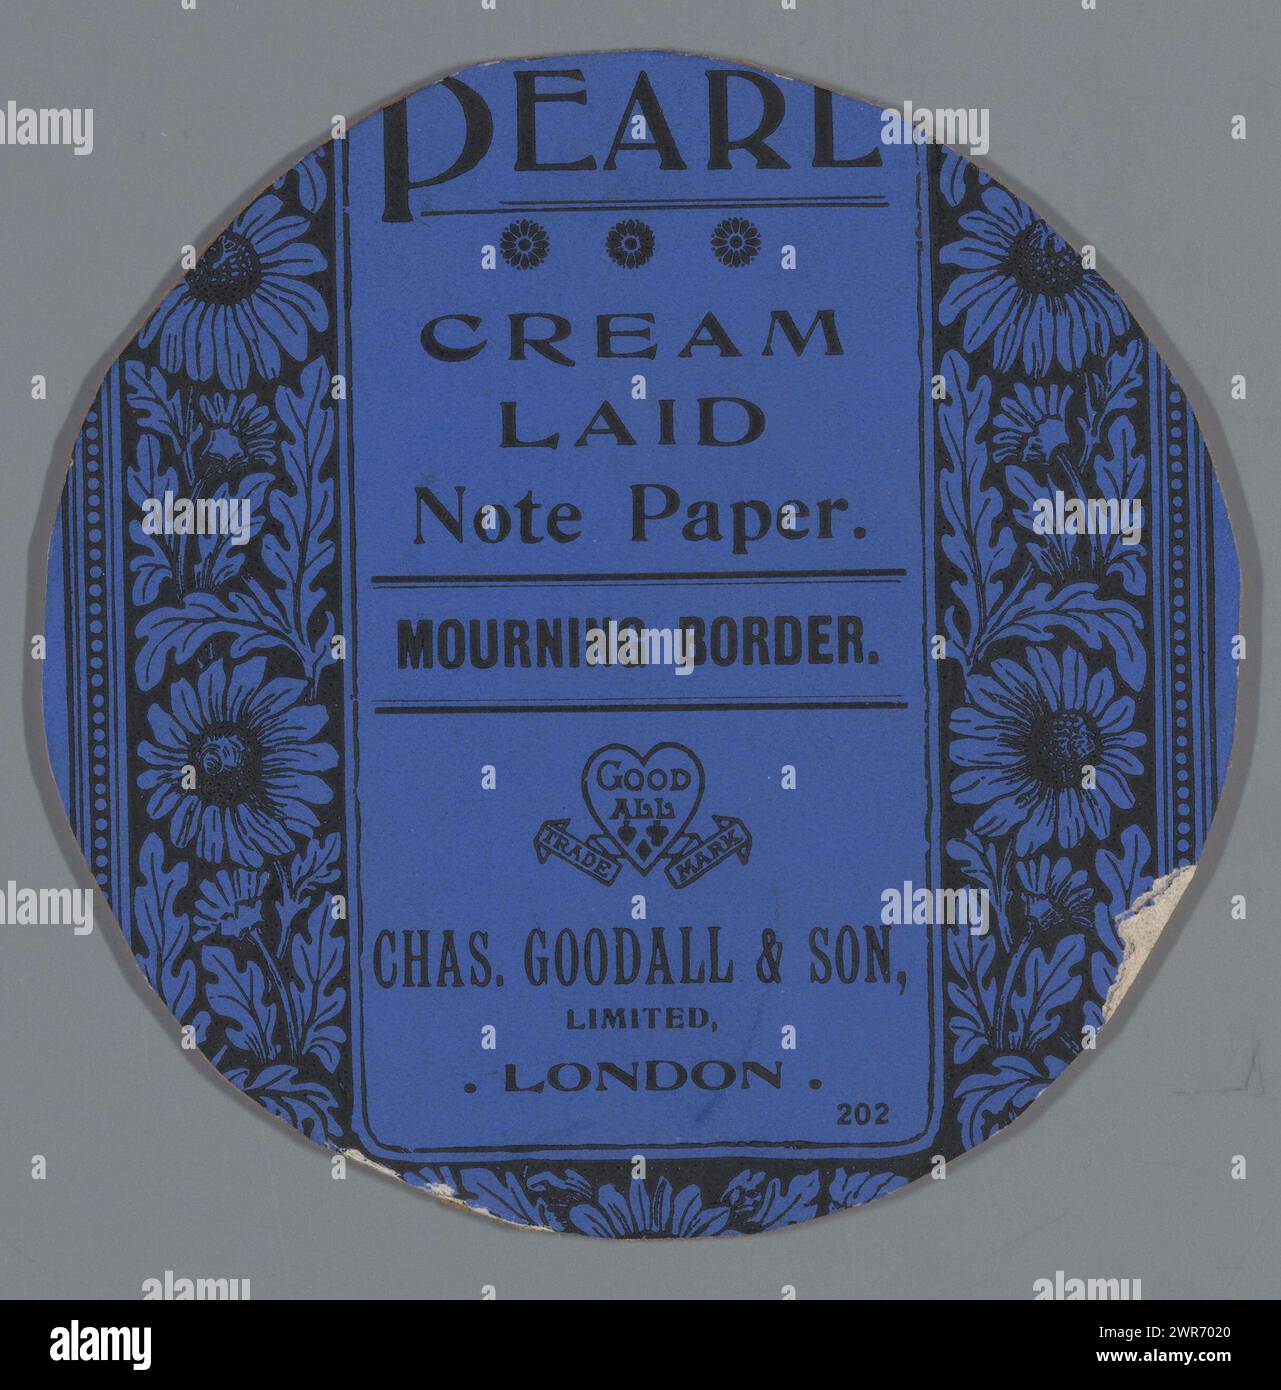 Advertising message for Pearl Cream Laid paper, maker: anonymous, c. 1910 - c. 1930, cardboard, printing block, height 95 mm × width 96 mm, advertisement Stock Photo